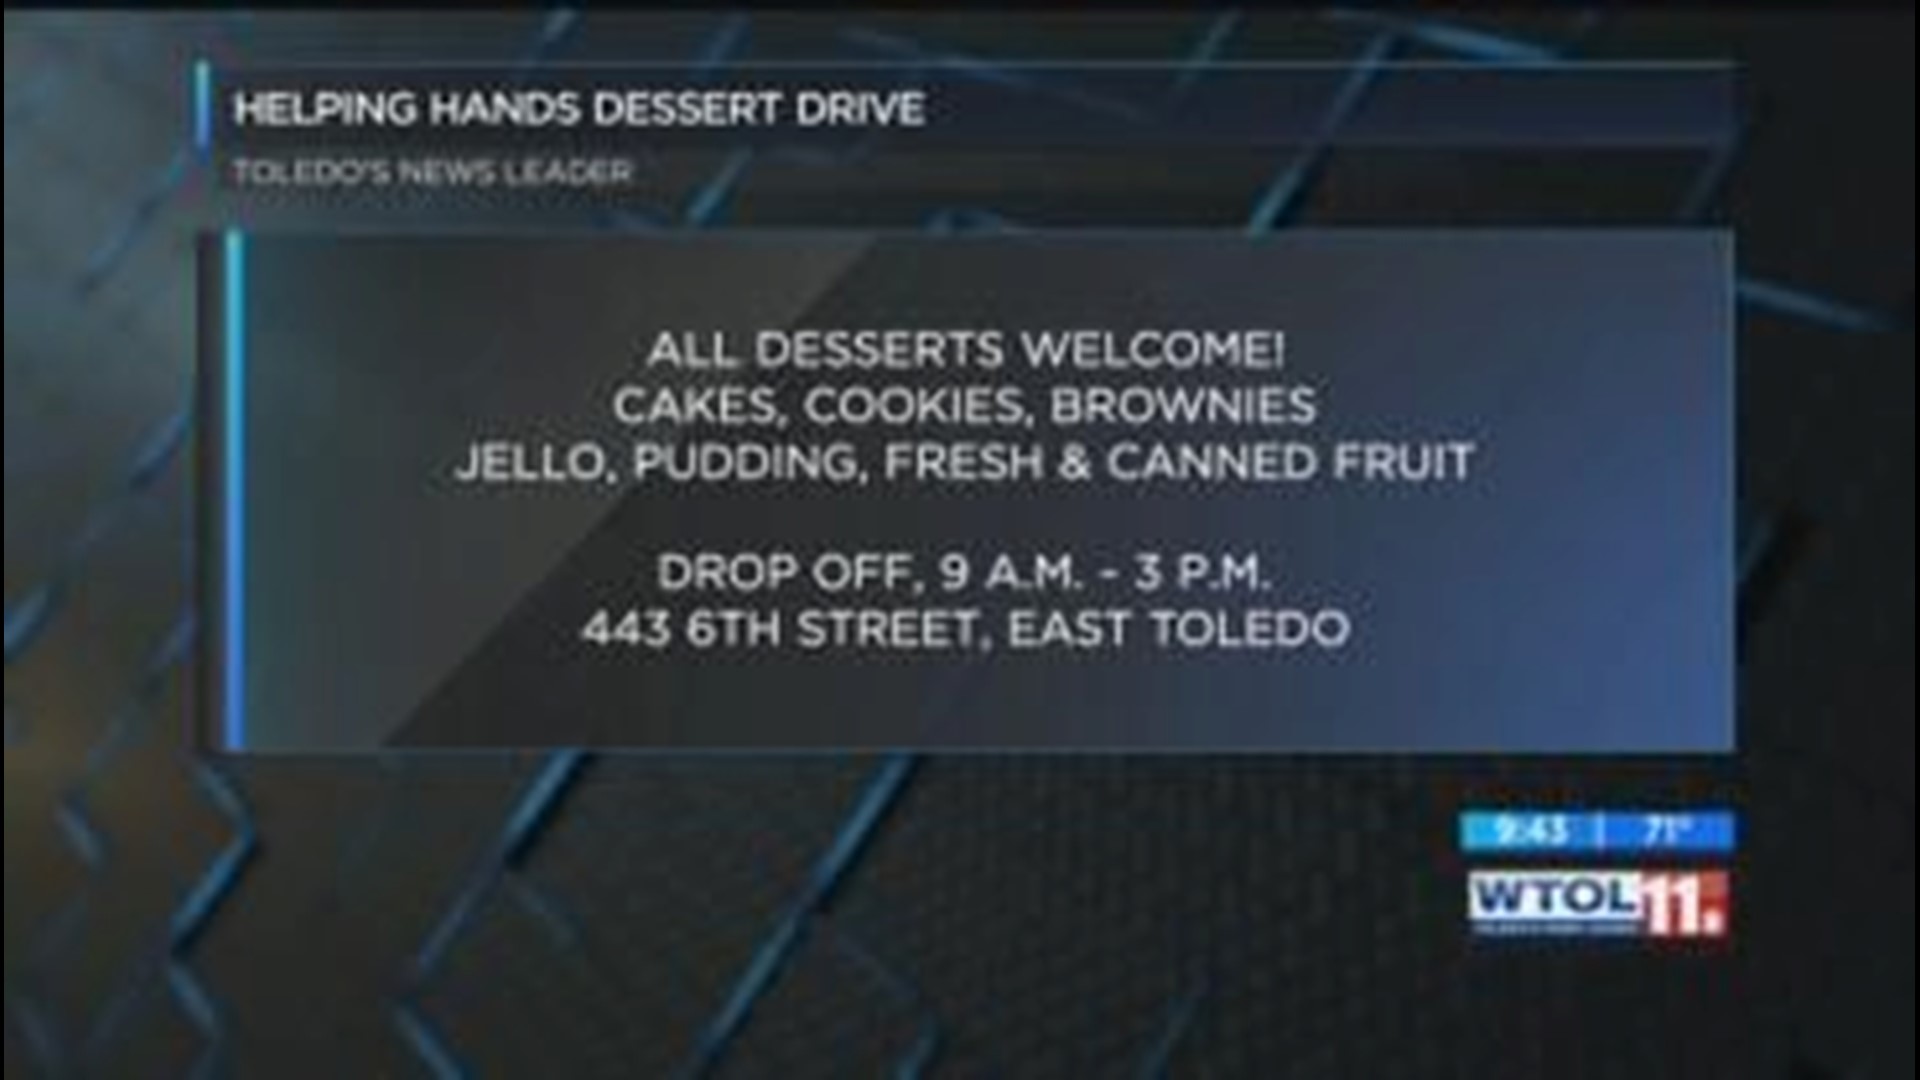 Attend the Helping Hands of St. Louis dessert drive